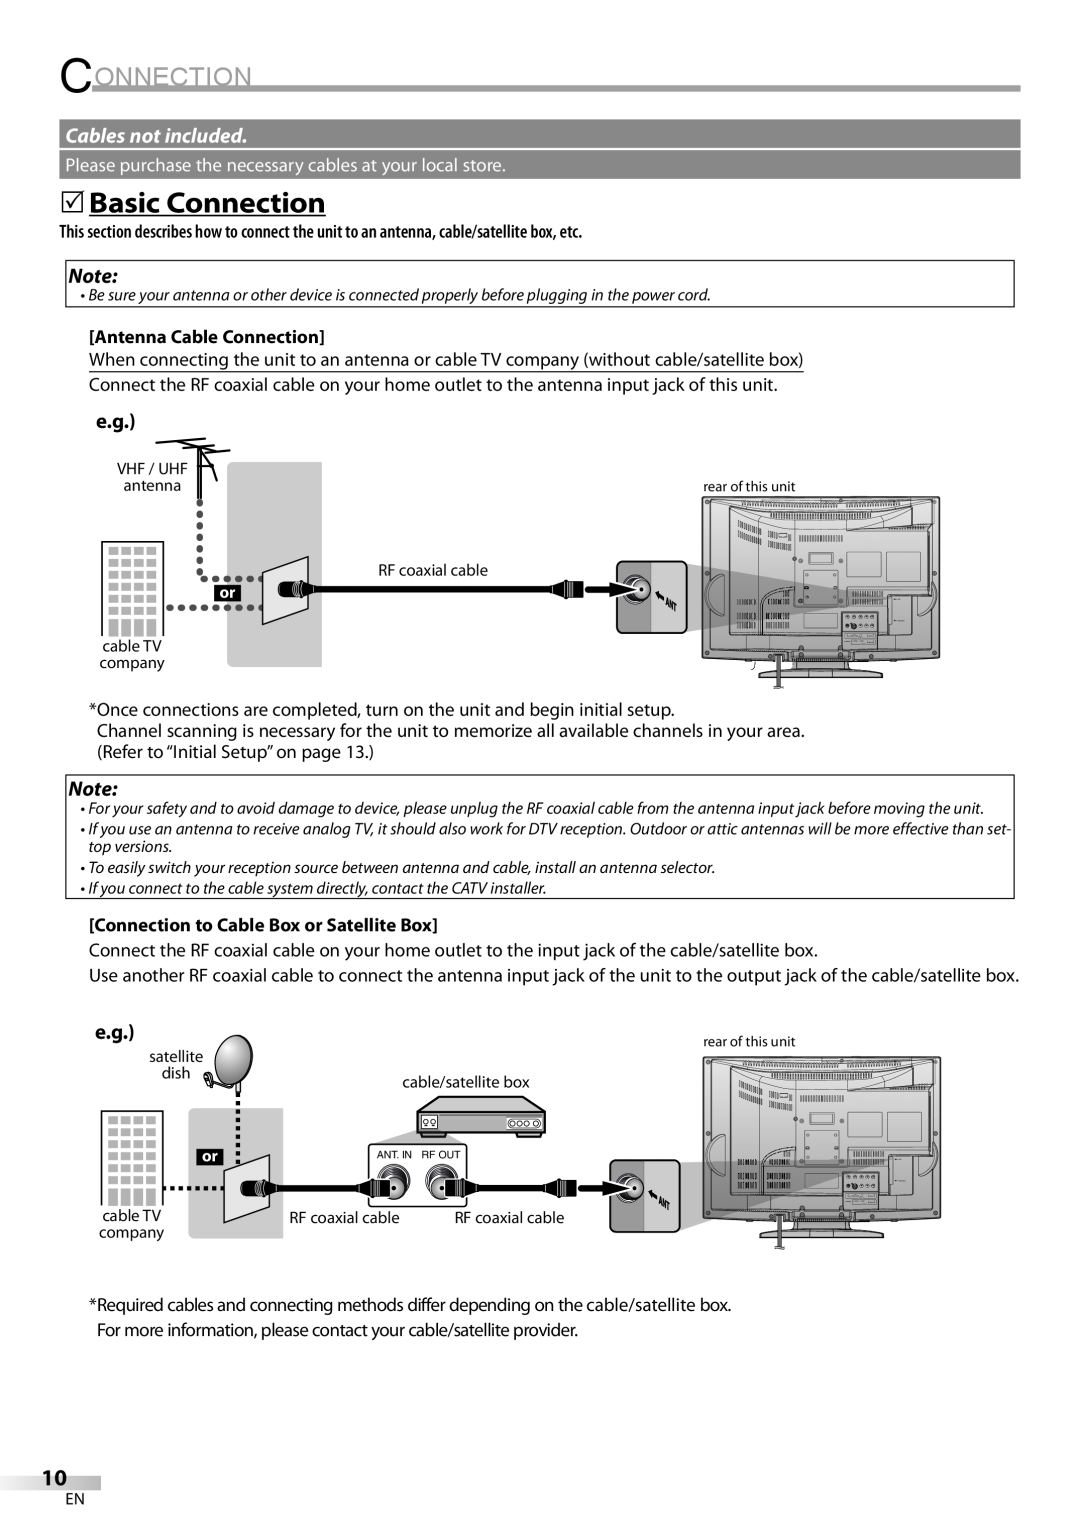 Sylvania LD200SL8 owner manual 5Basic Connection, Cables not included, Antenna Cable Connection 